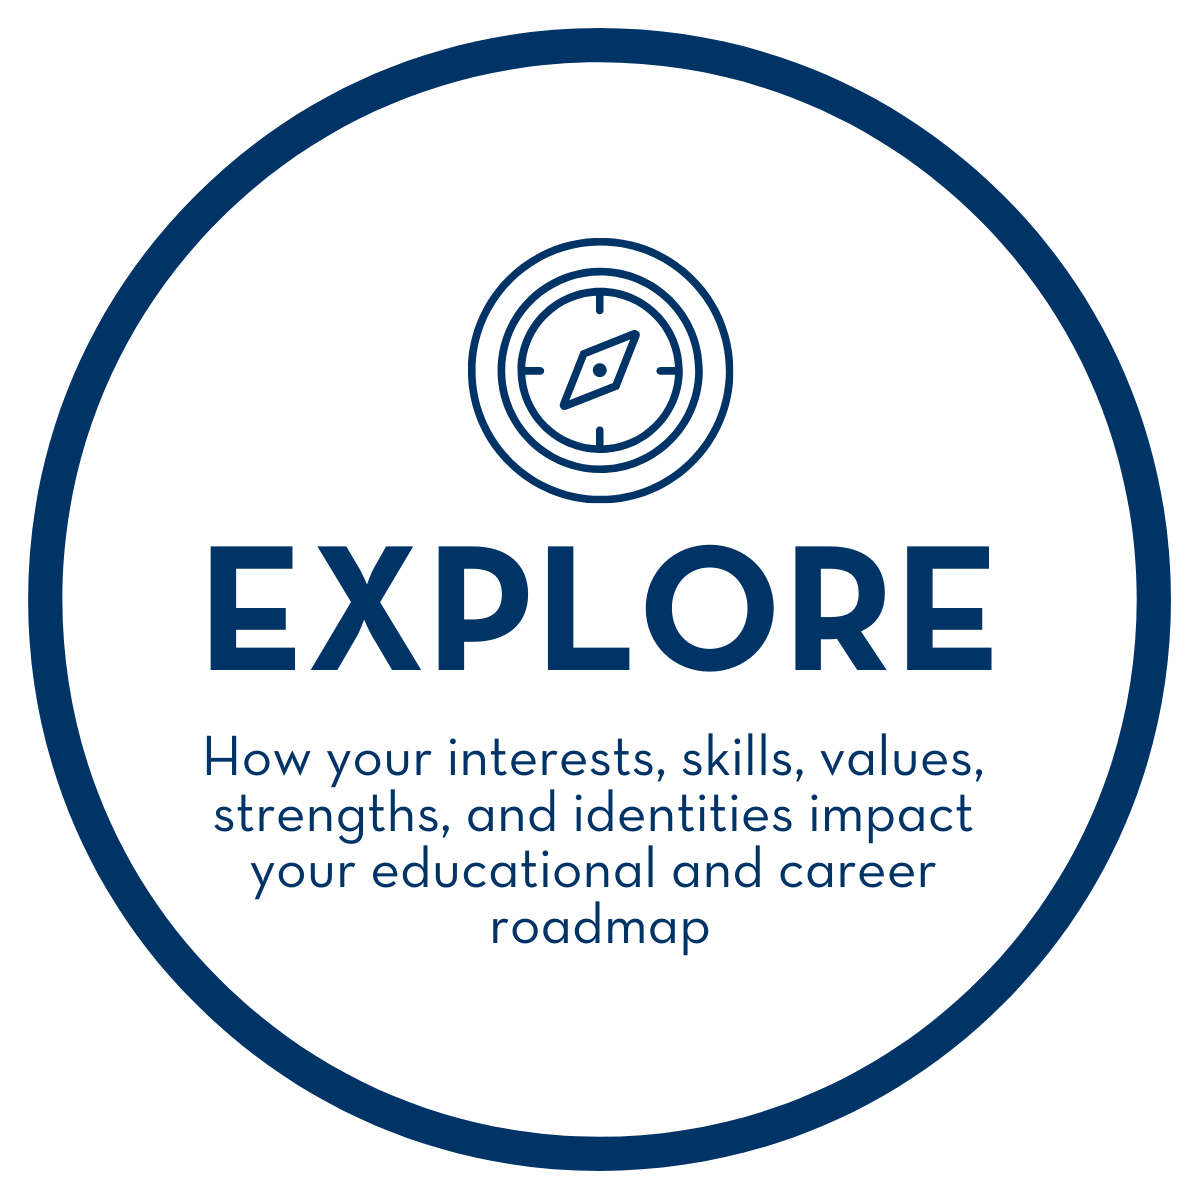 Explore graphic with text - Explore: How your interests, skills, values, strengths, and identities impact your educational and career roadmap